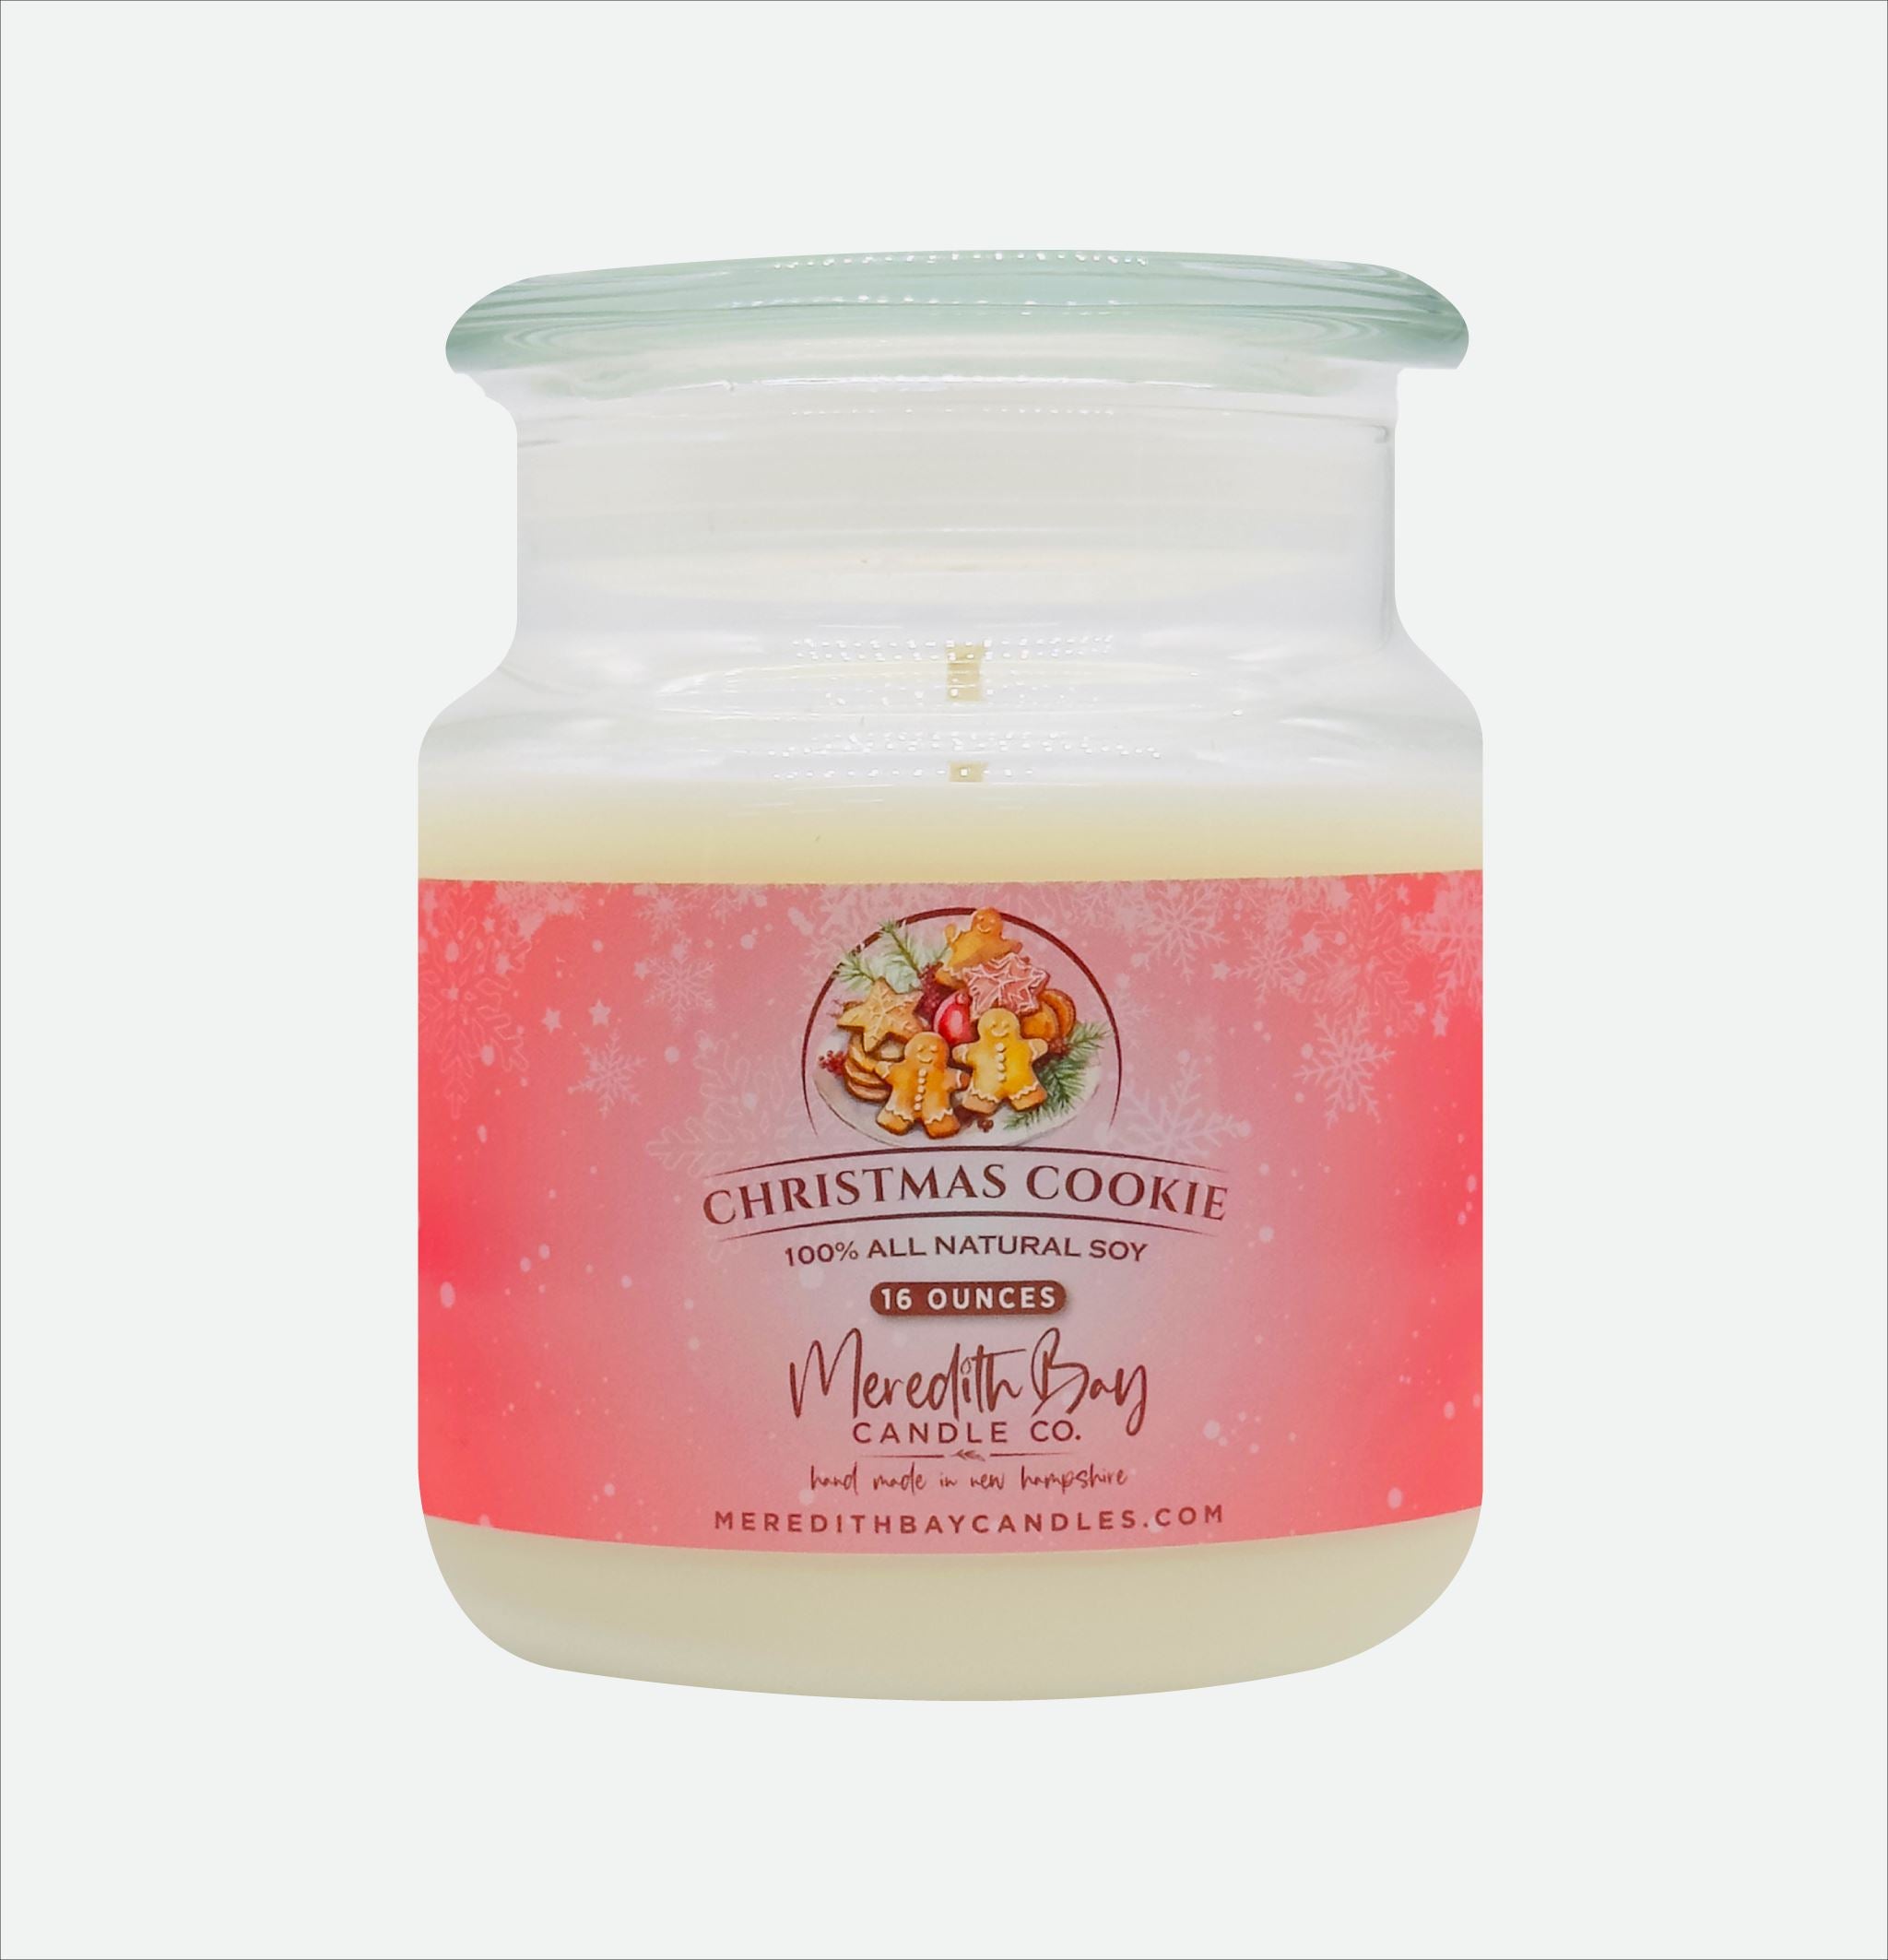 Christmas Cookie Soy Candle Meredith Bay Candle Co 16 Oz 